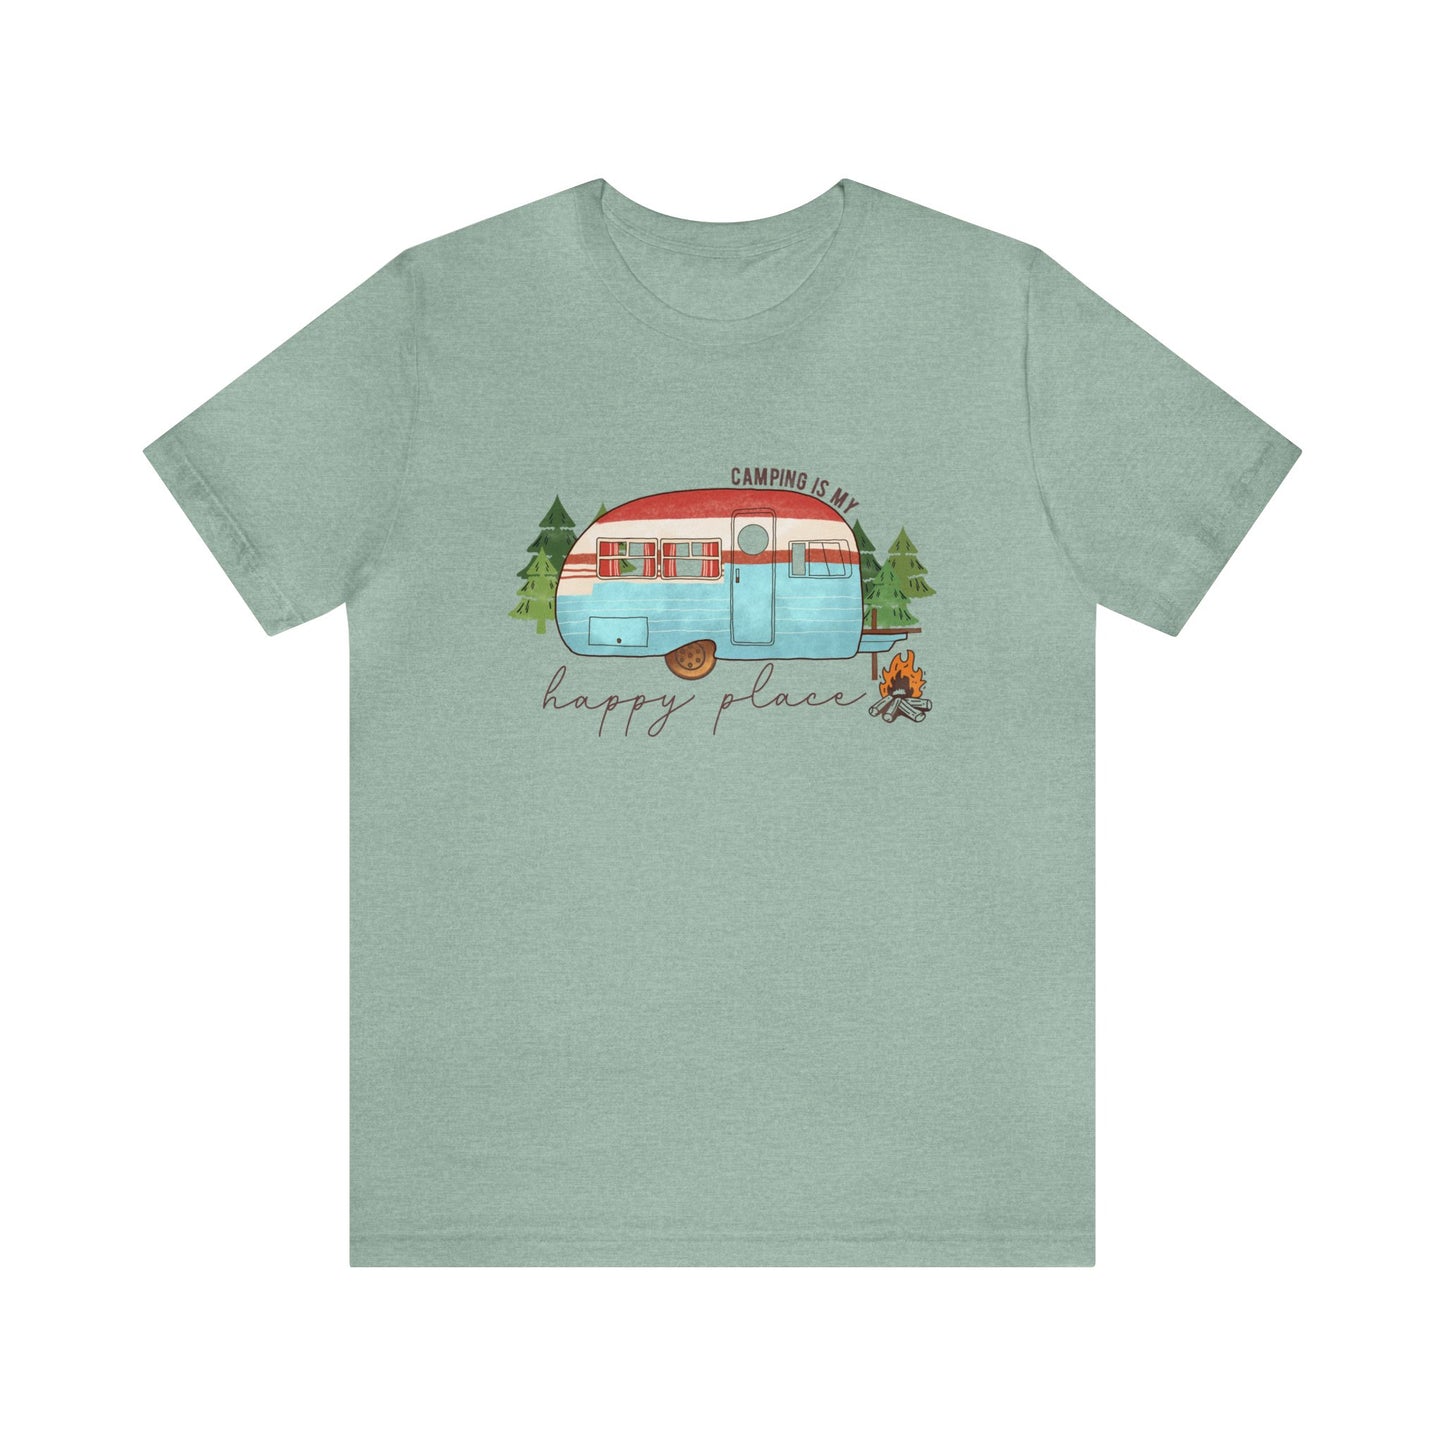 Camping is my happy place adult unisex Tshirt